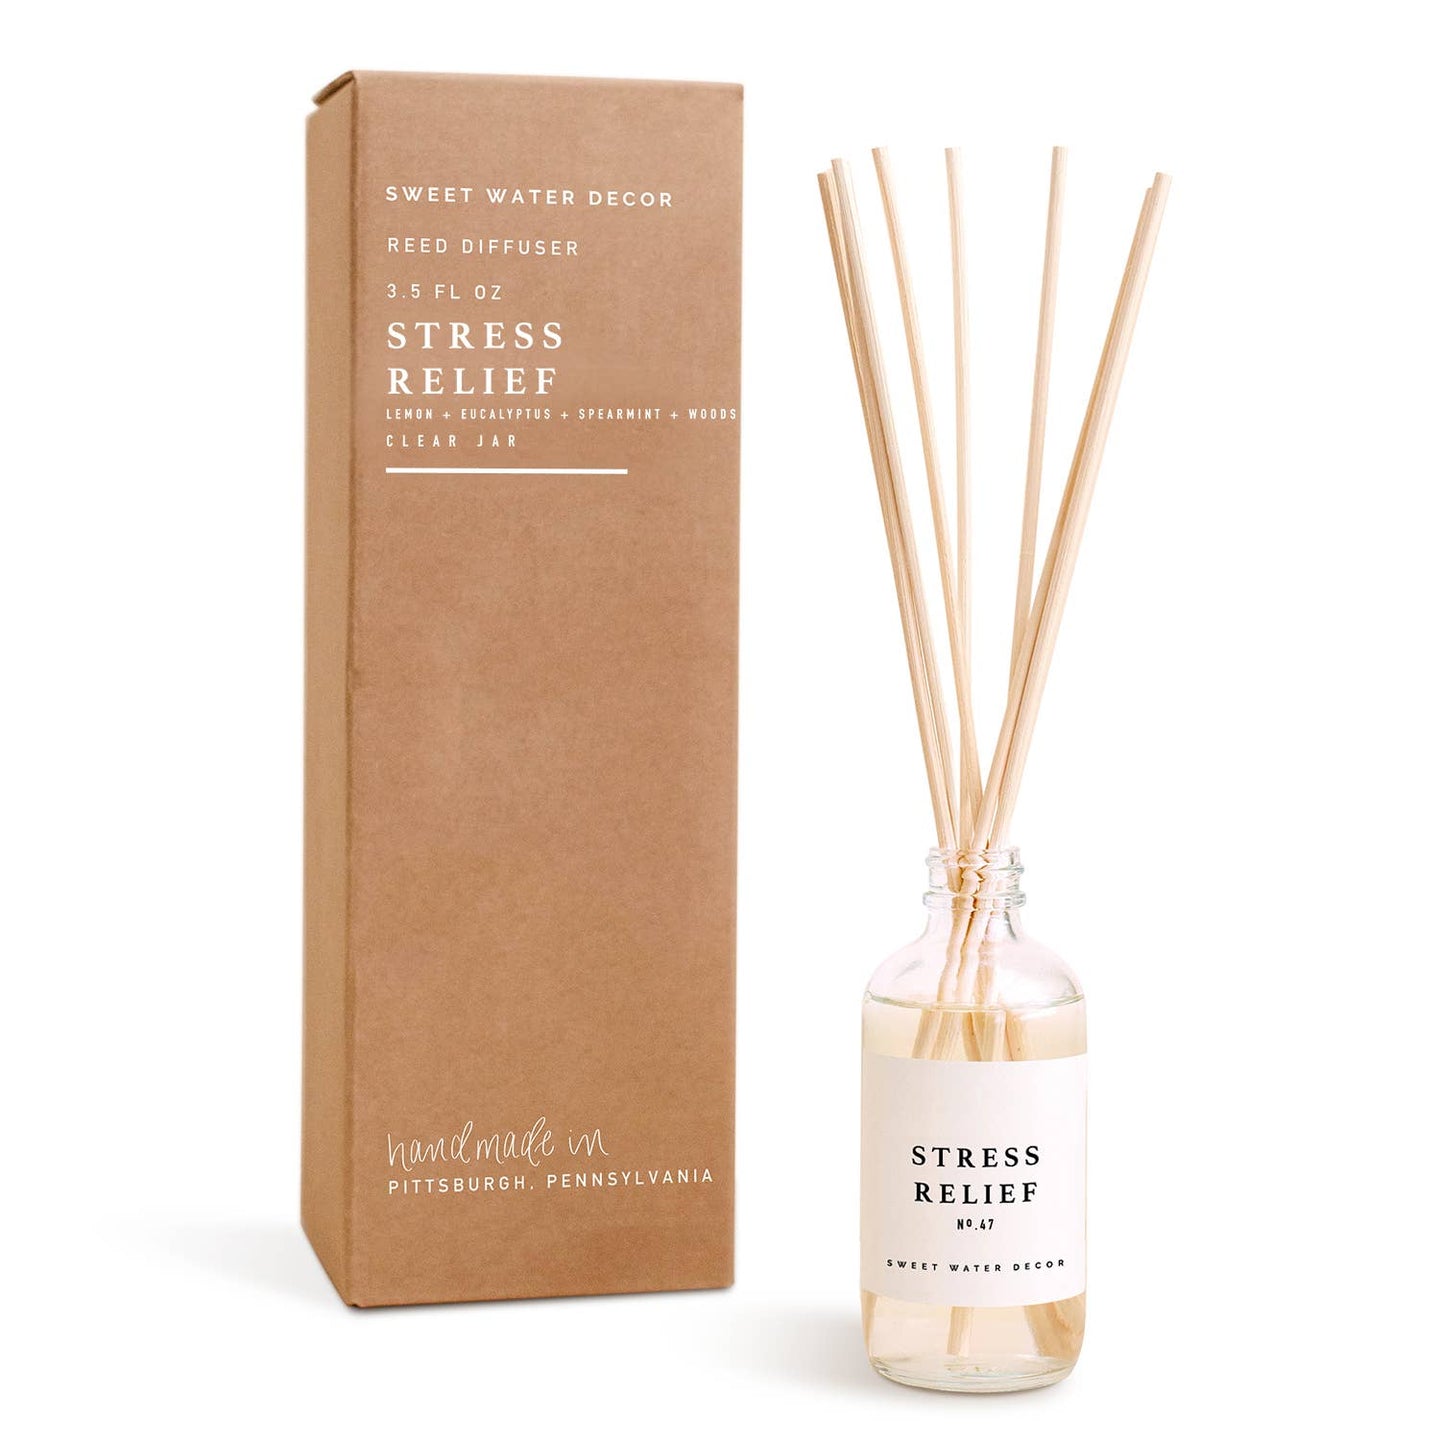 Sweet Water Decor - Stress Relief Reed Diffuser - Clear Jar - 3.5 oz